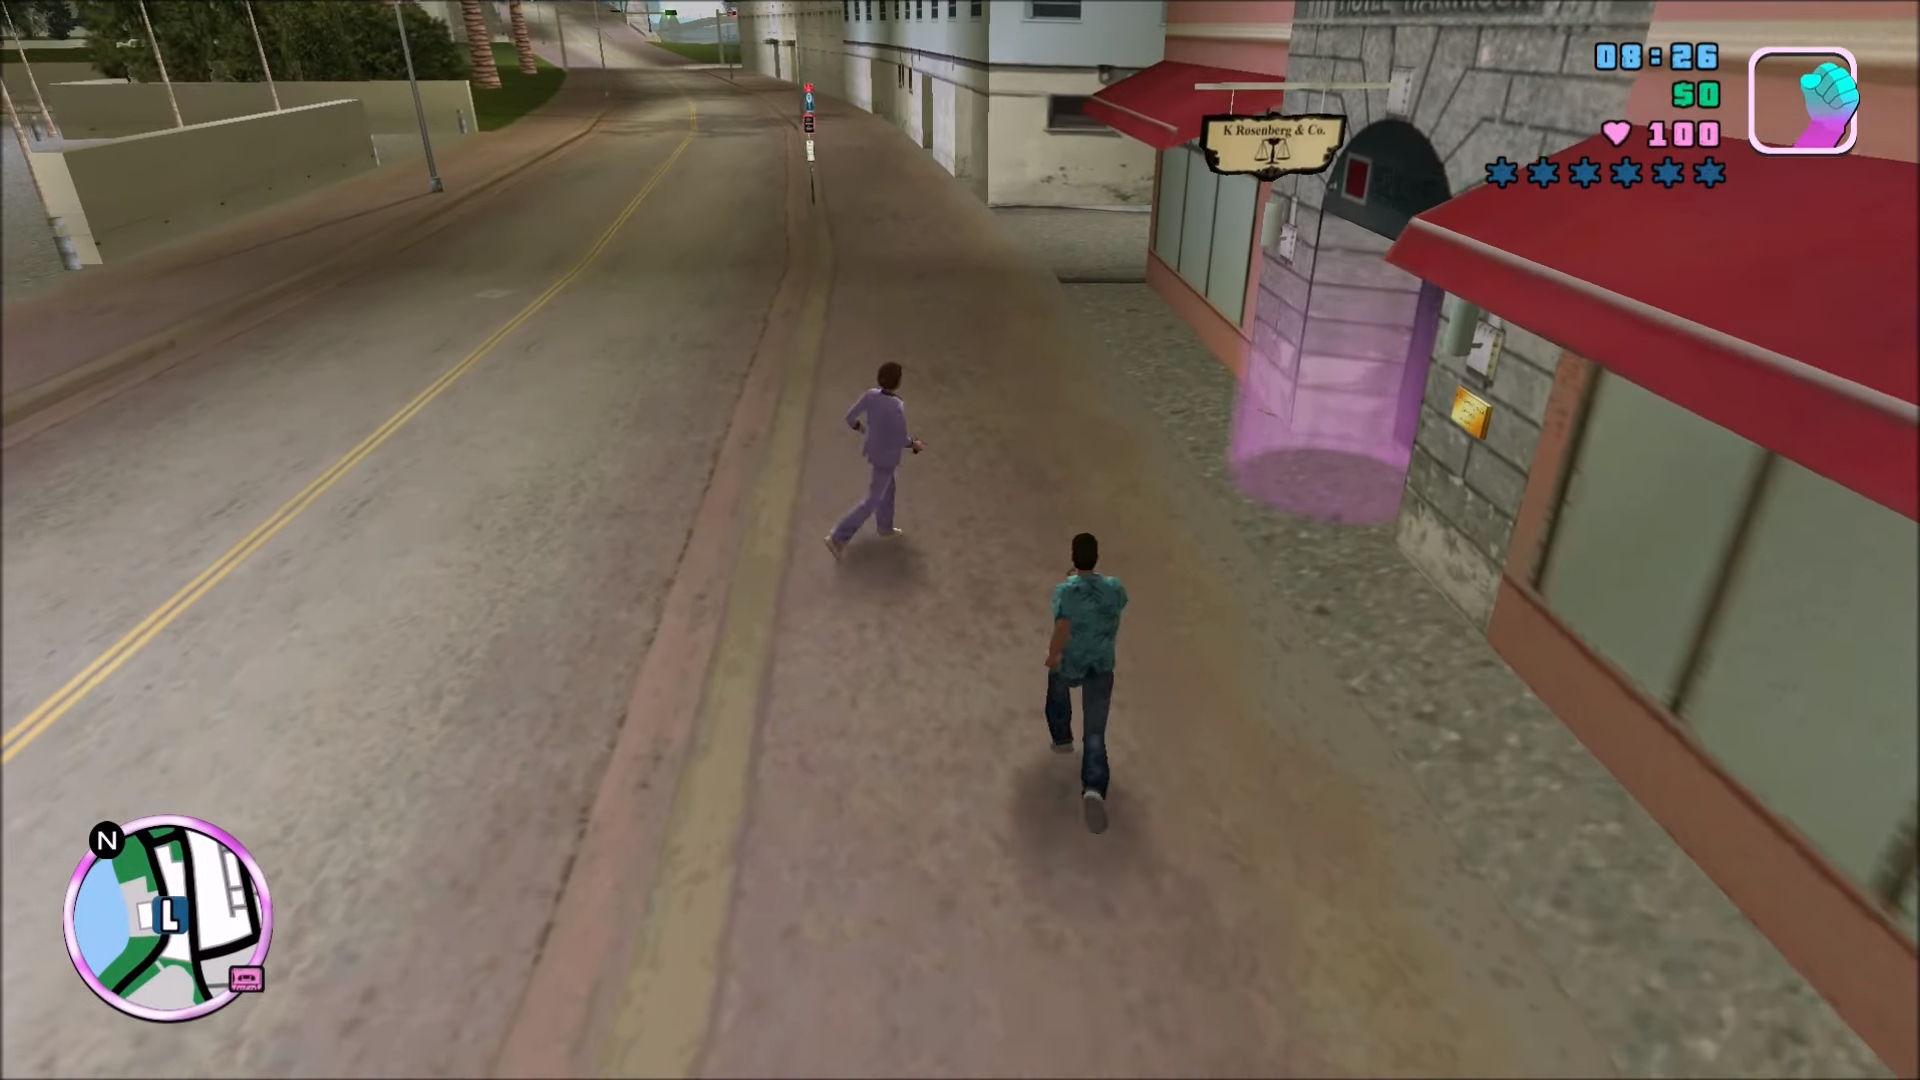 vc 2 players mod for grand theft auto vice city, image 3, image, screenshot...